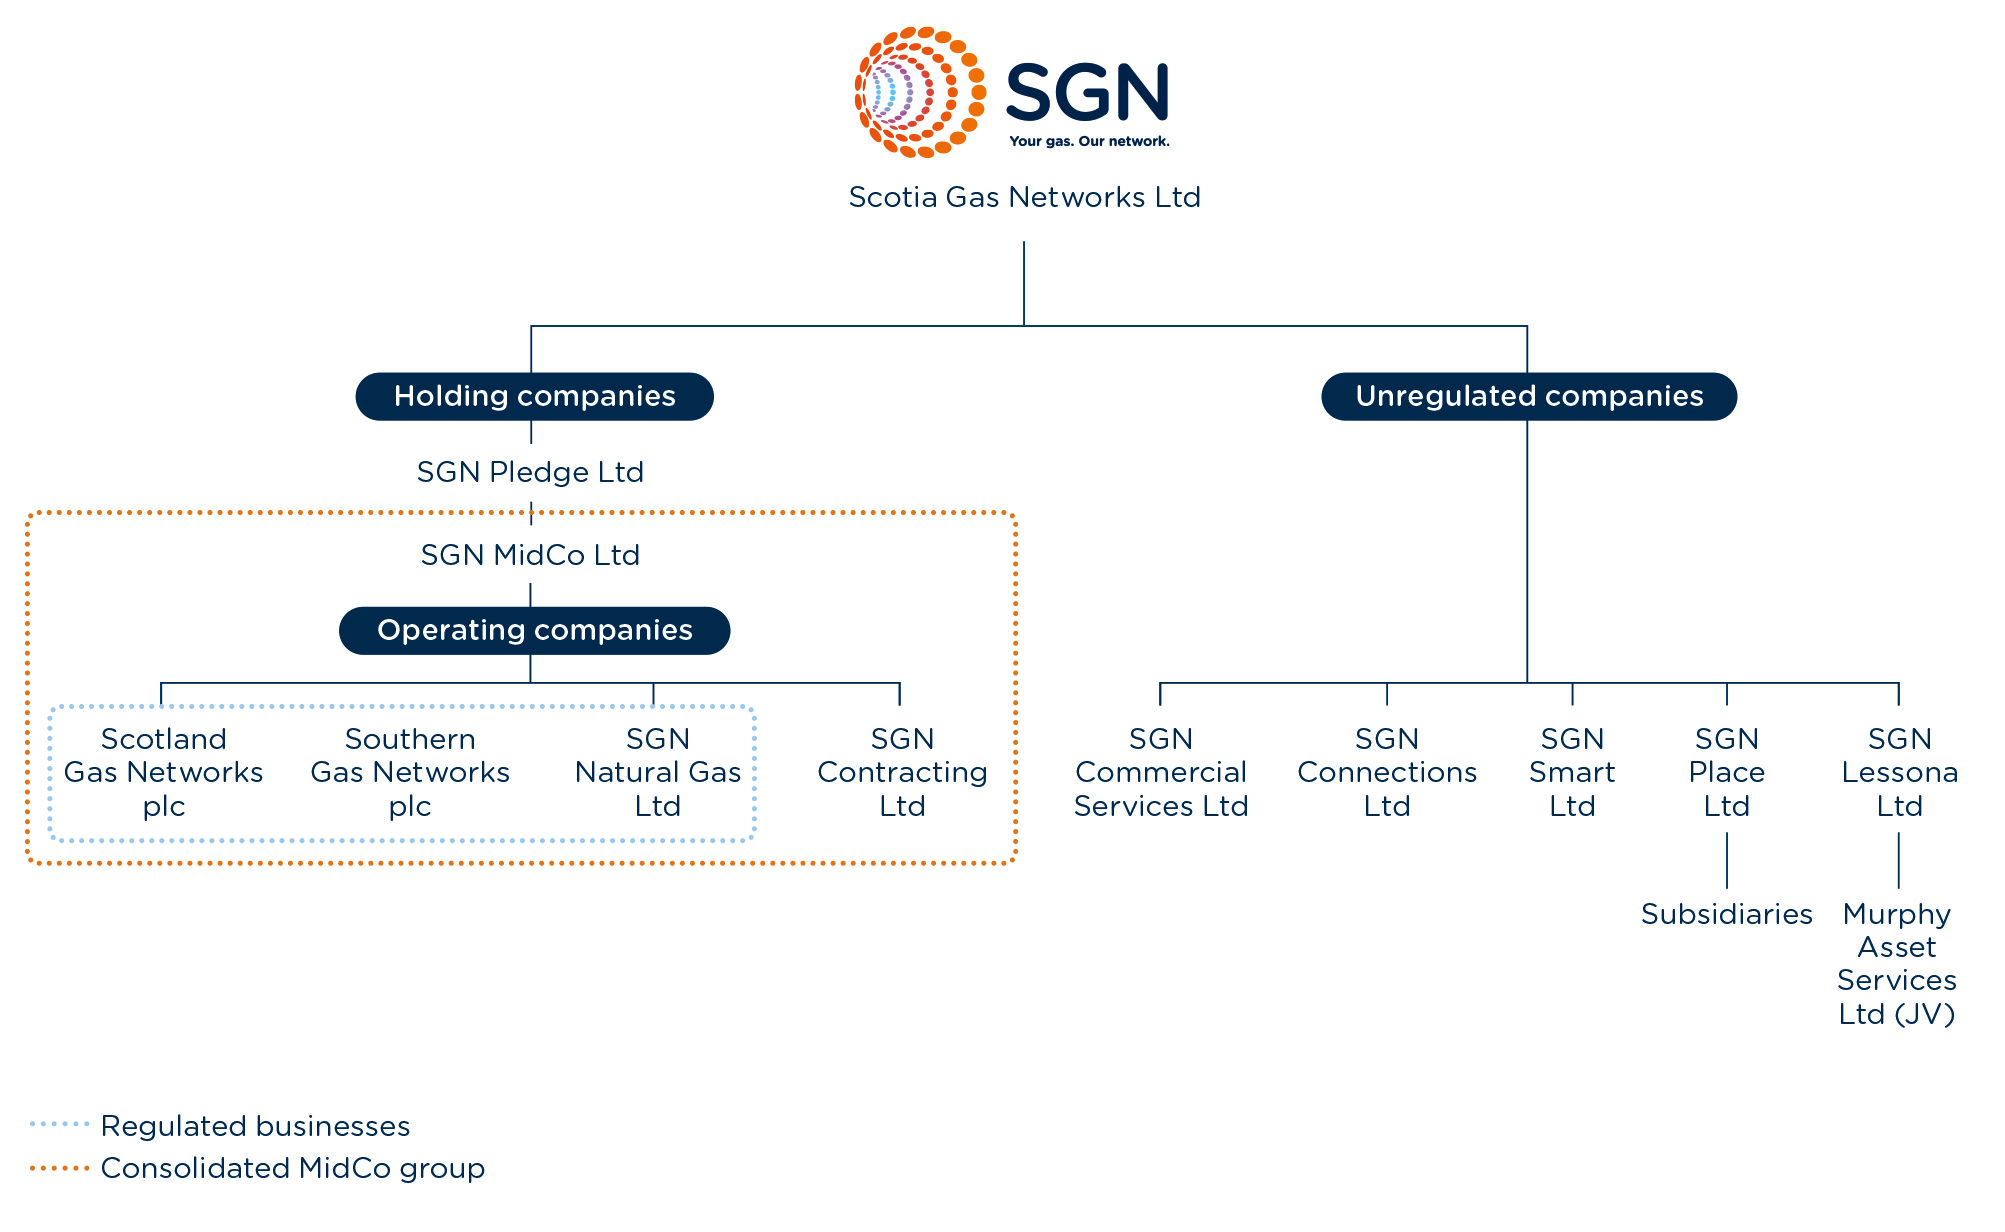 SGN group structure diagram showing holding companies and unregulated companies. Under Scotia Gas Networks SGN Pledge Ltd which is a holding company for SGN MidCo Ltd. Under this is the 4 operating companies: Scotland Gas Networks, Southern Gas Networks, SGN Natural Gas and SGN Contracting. Under Scotia Gas Networks is also a number of unregulated companies. These are: SGN Commercial Services, SGN Connections, SGN Smart, SGN Place and SGN Lessona.